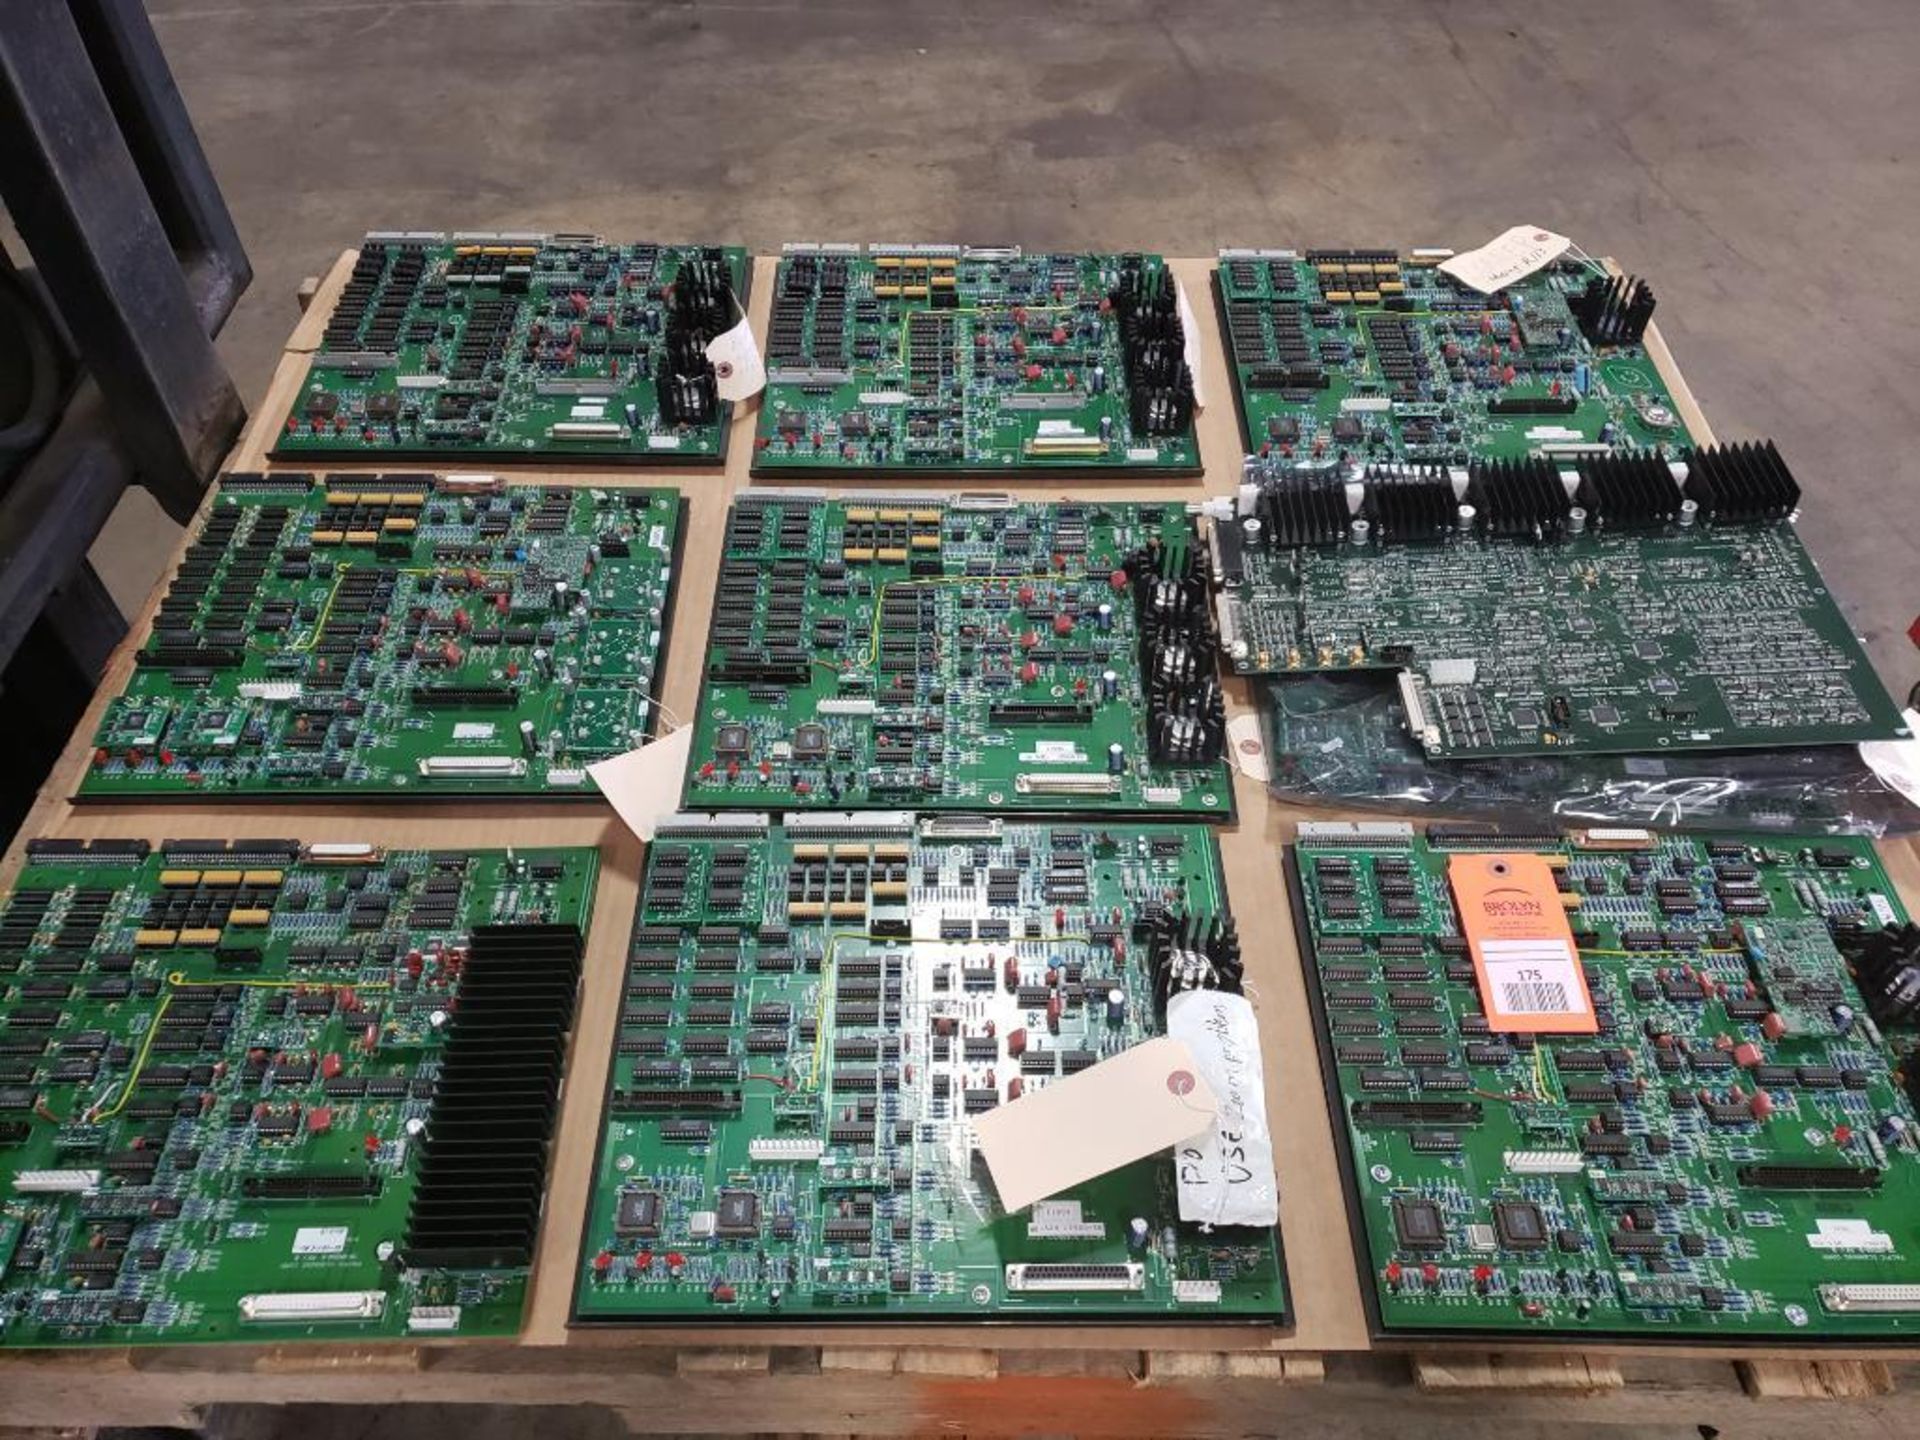 Assorted computer boards. Marked needs repair or testing. Pacific Scanning Corp.